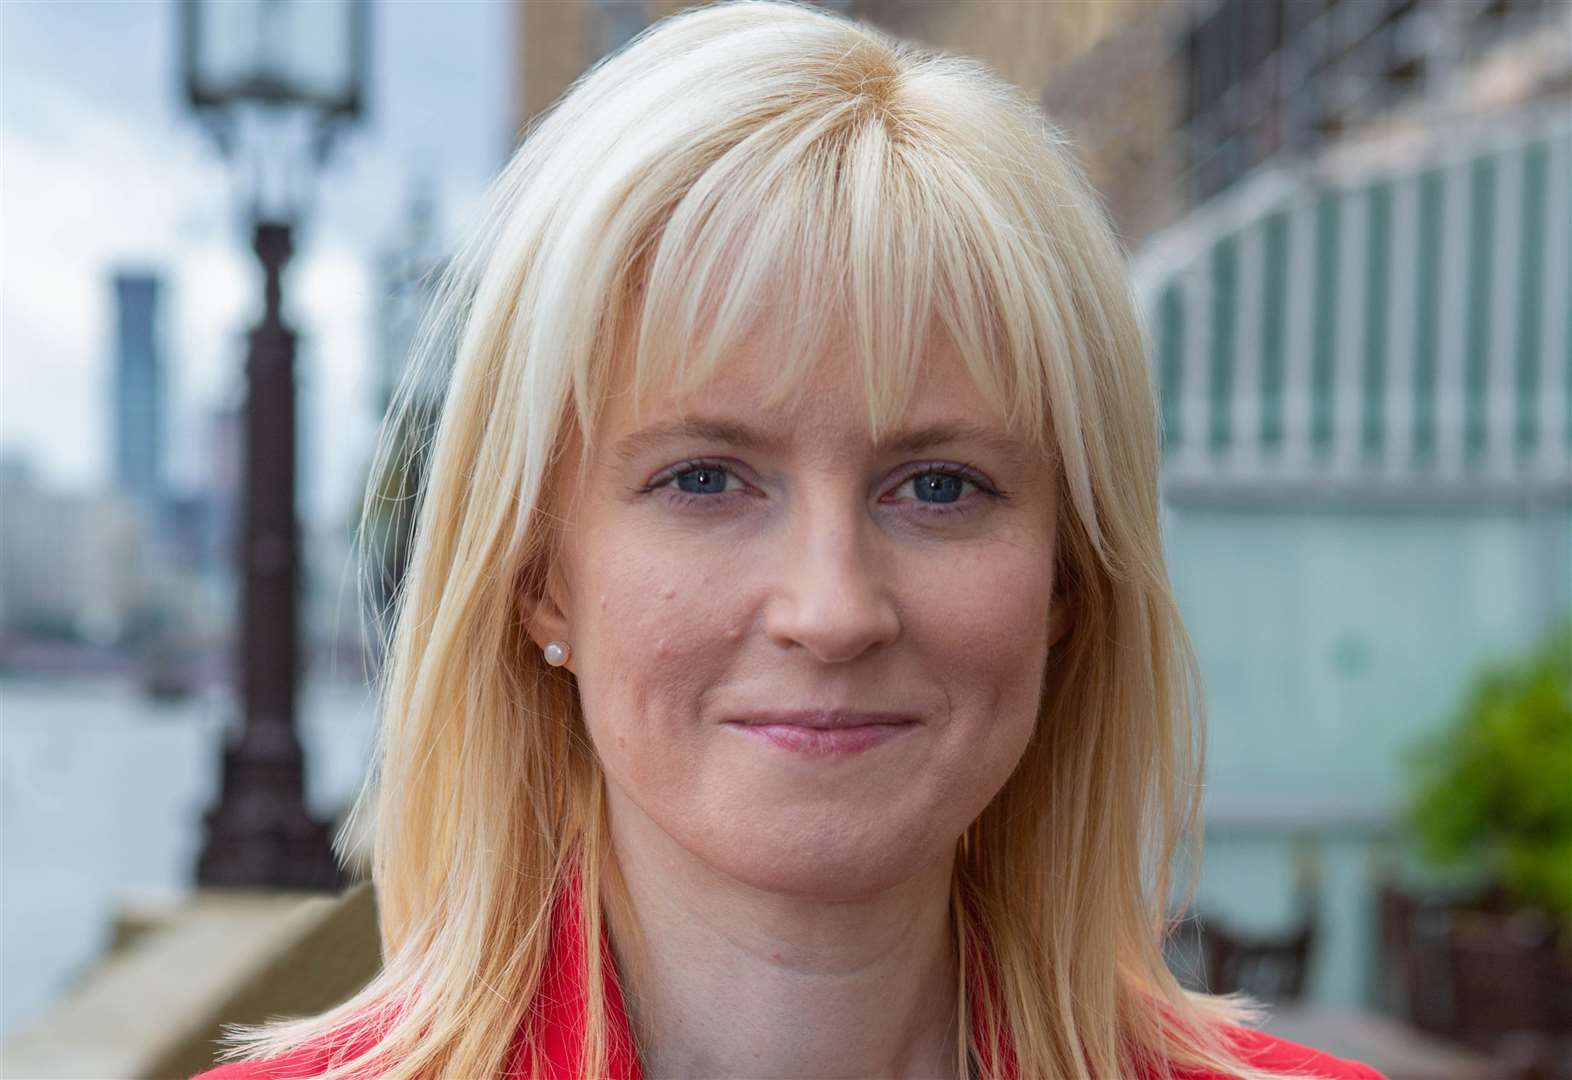 Labour MP for Canterbury, Rosie Duffield